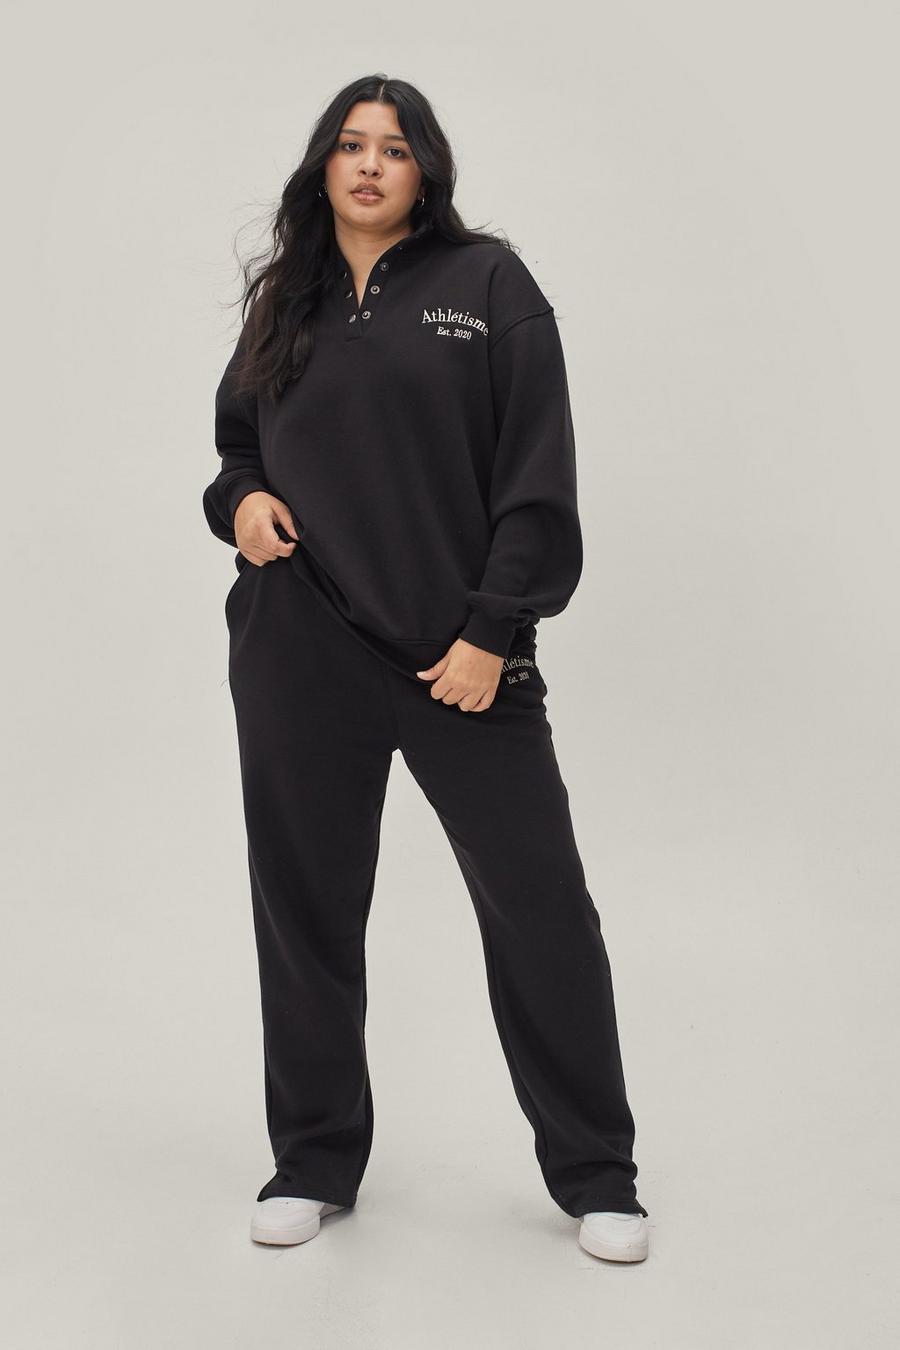 Plus Size Athleisure Graphic Wide Leg Joggers